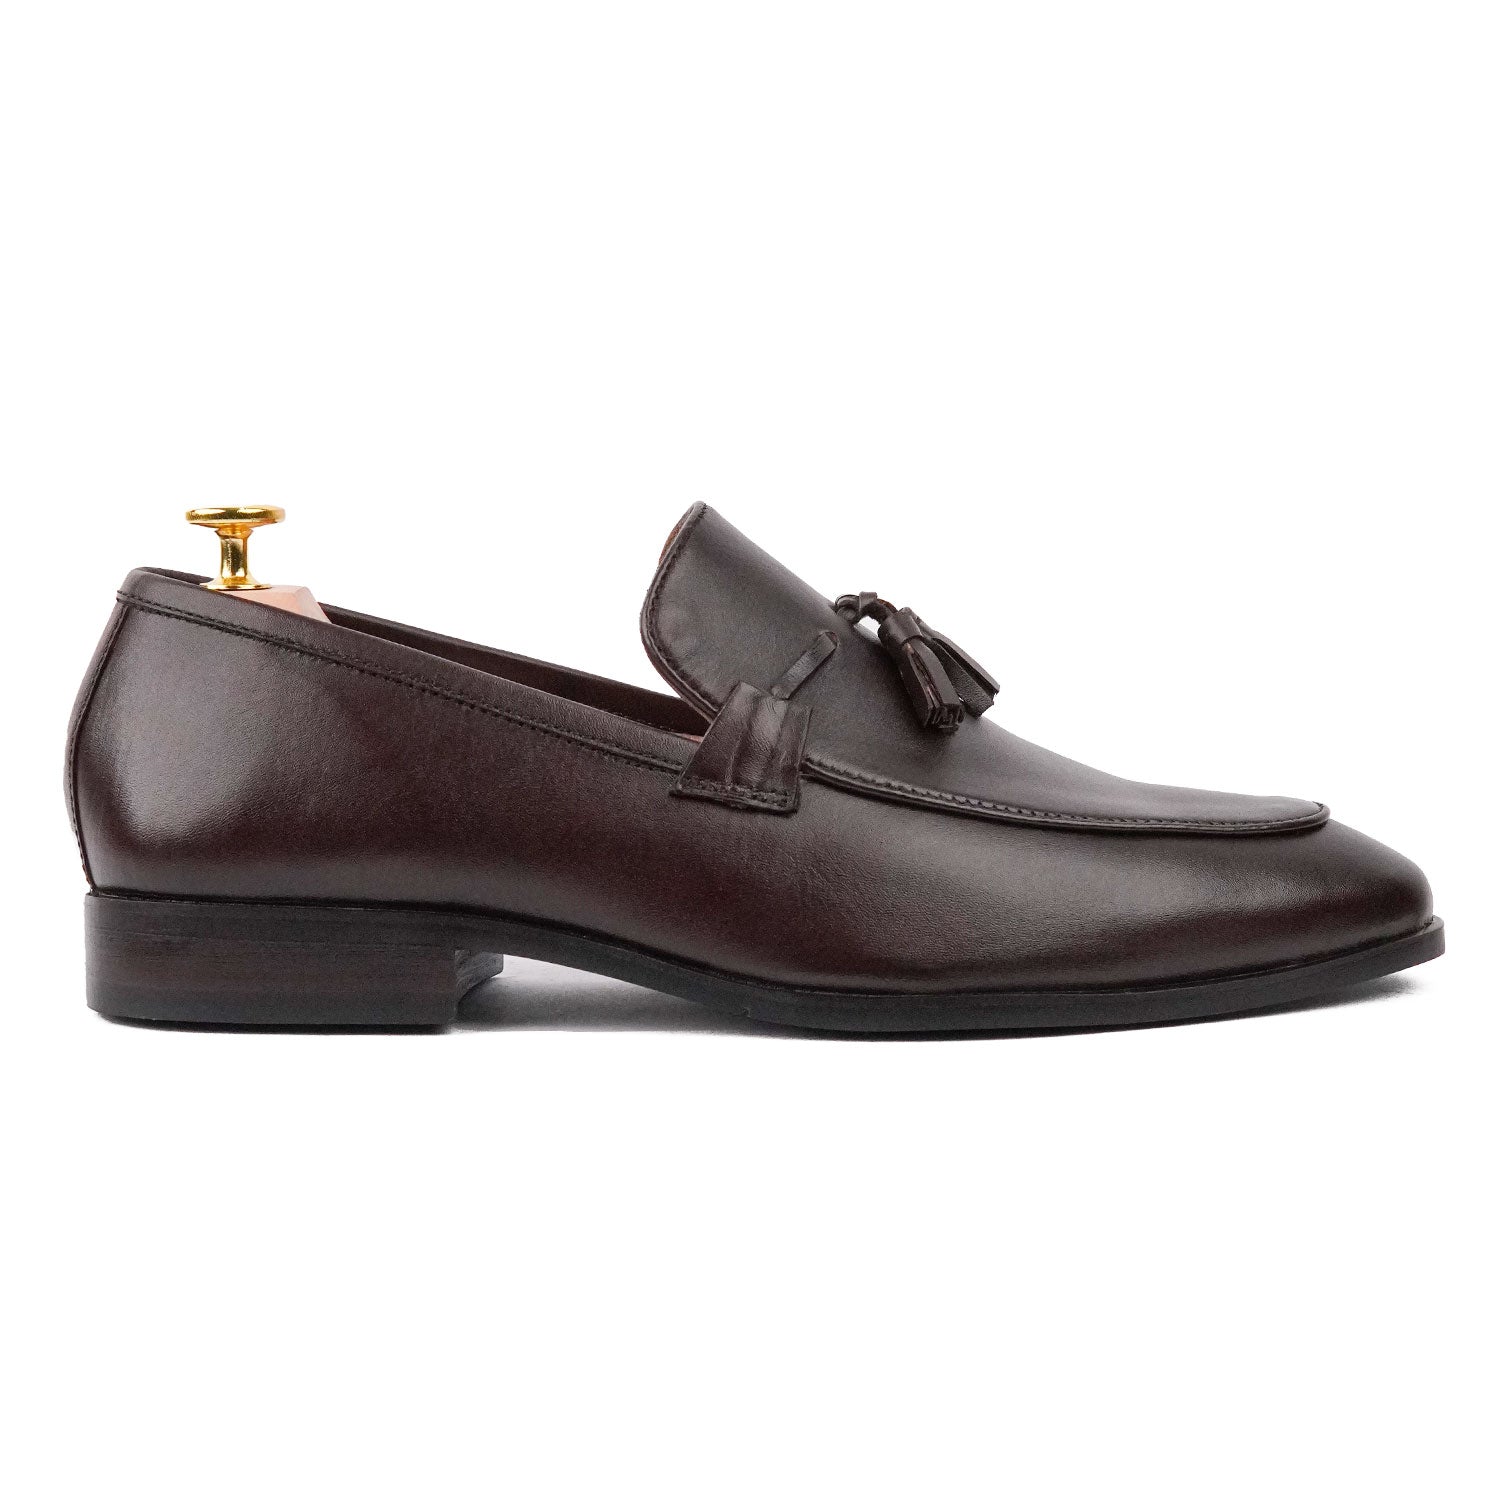 Budapest Loafer - Brown